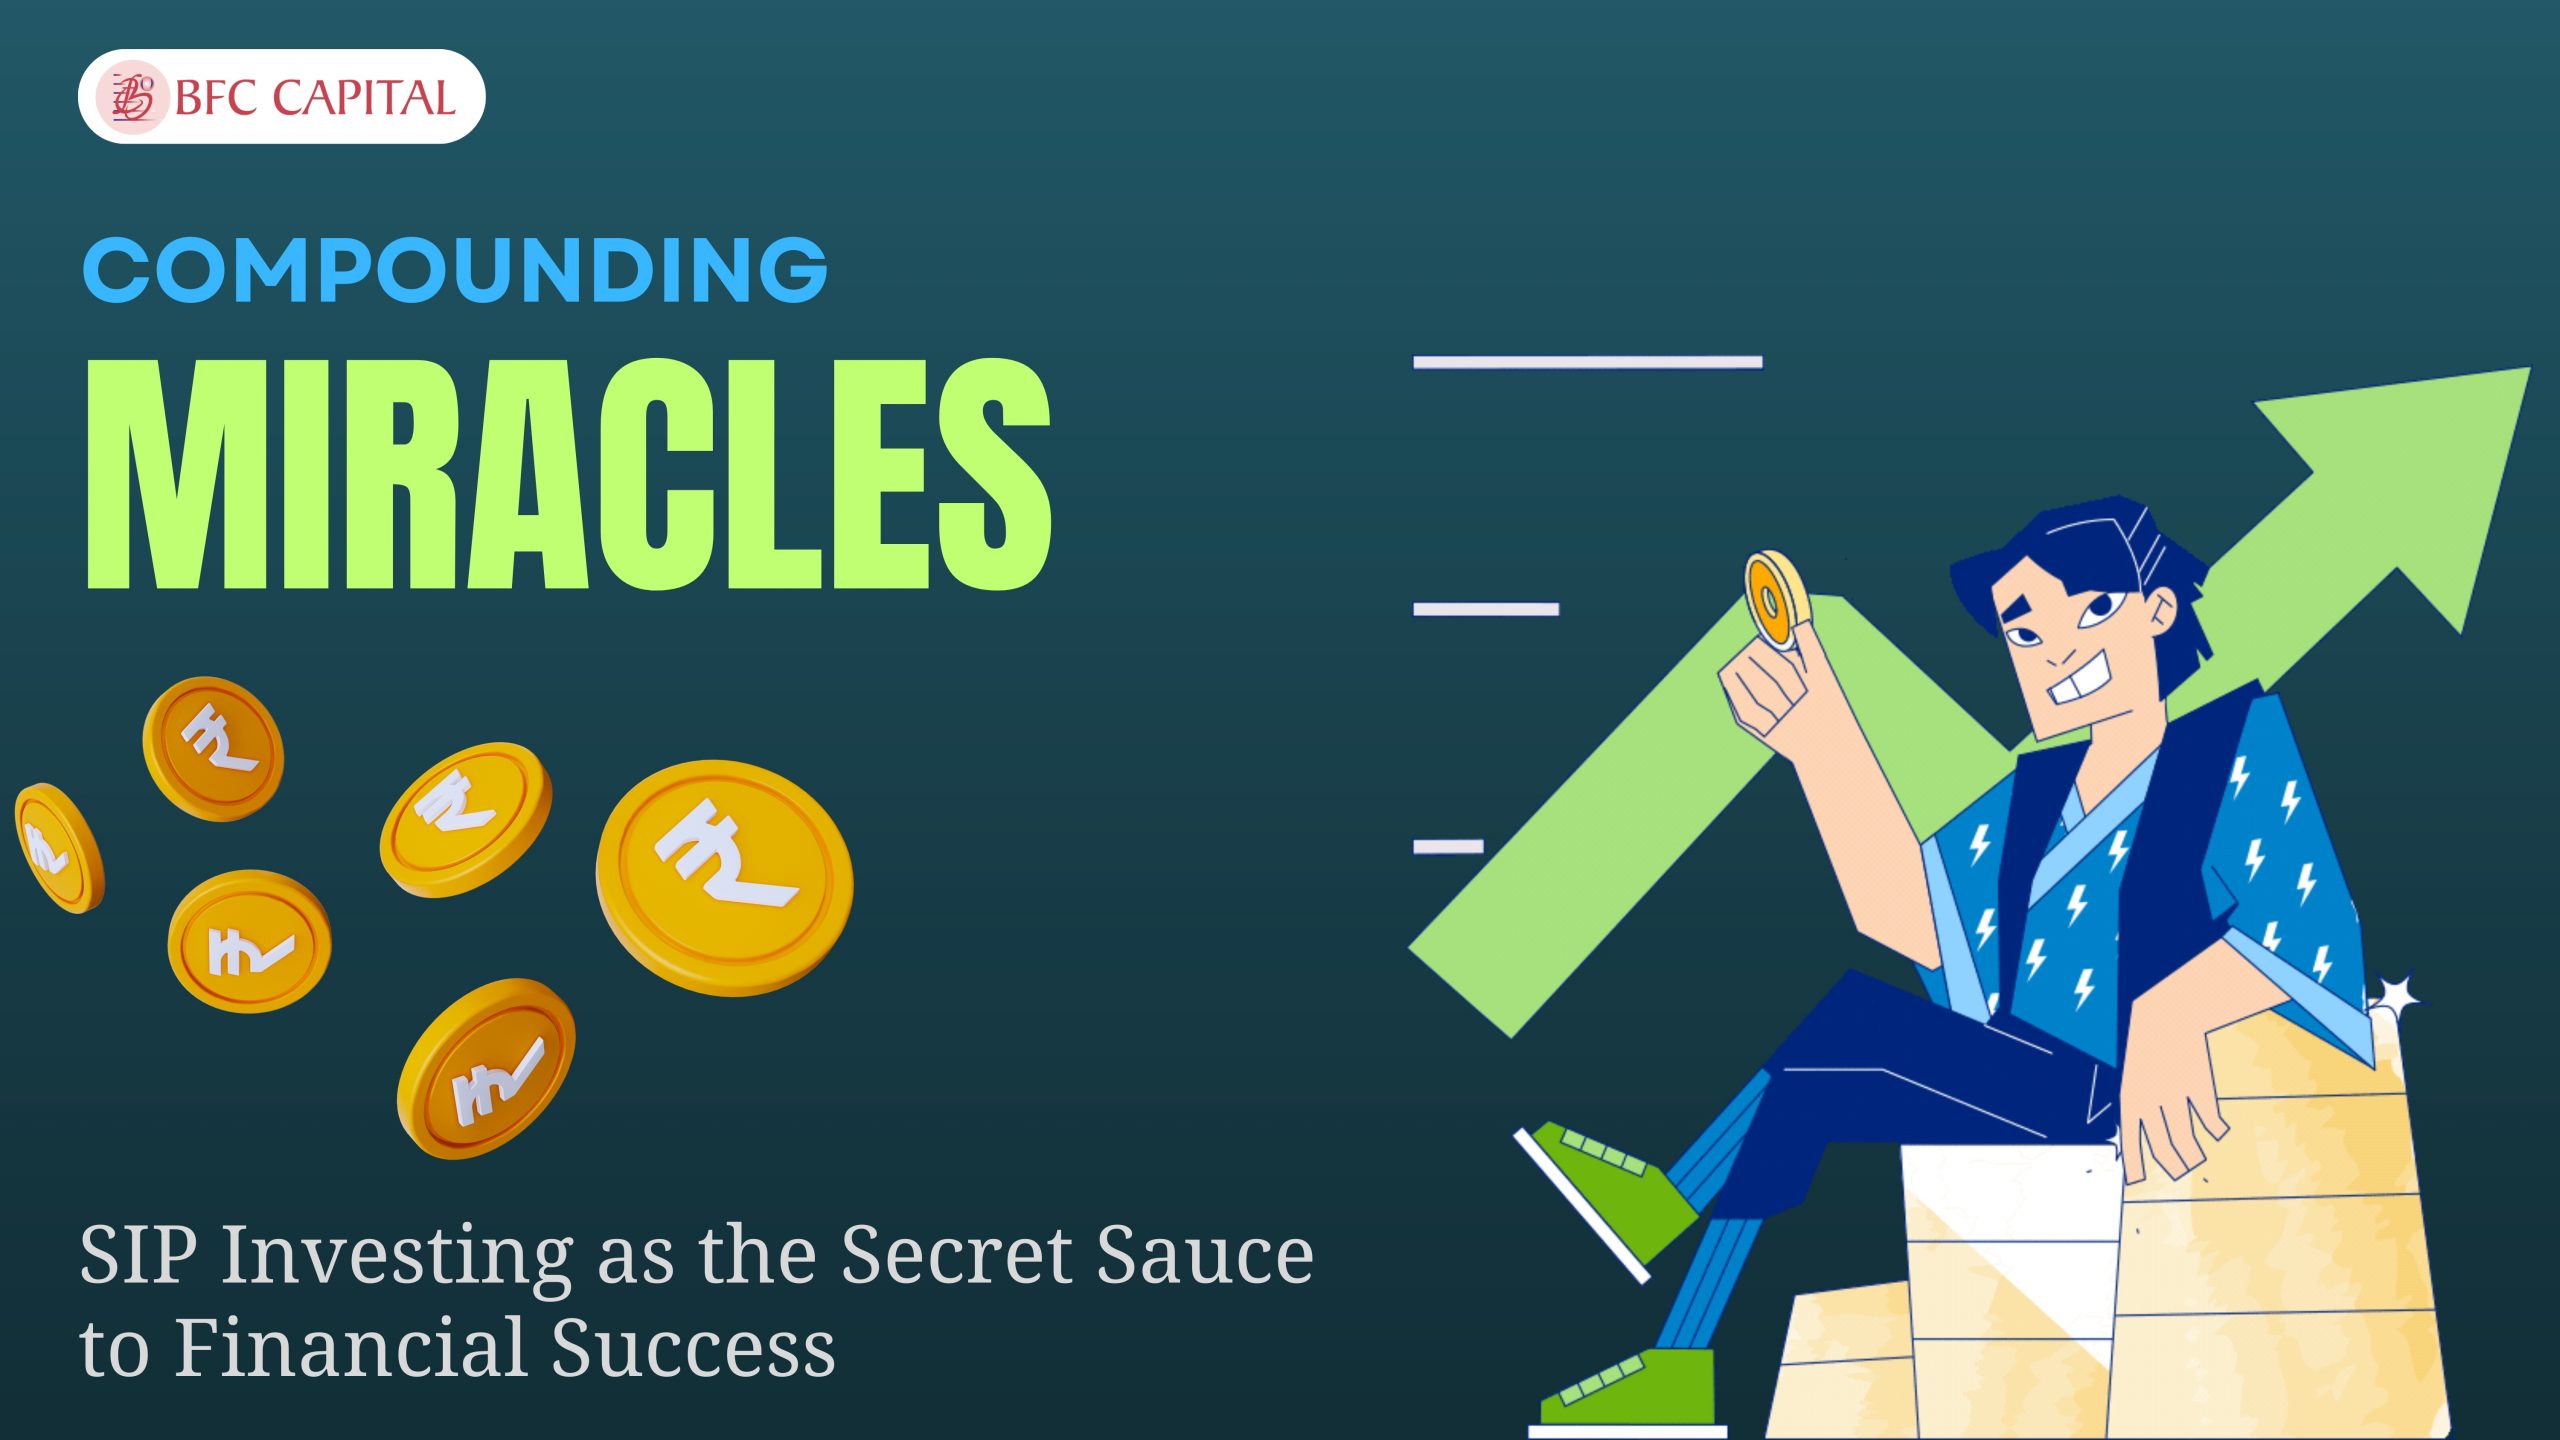 COMPOUNDING MIRACLES: SIP INVESTING AS THE SECRET SAUCE TO FINANCIAL SUCCESS